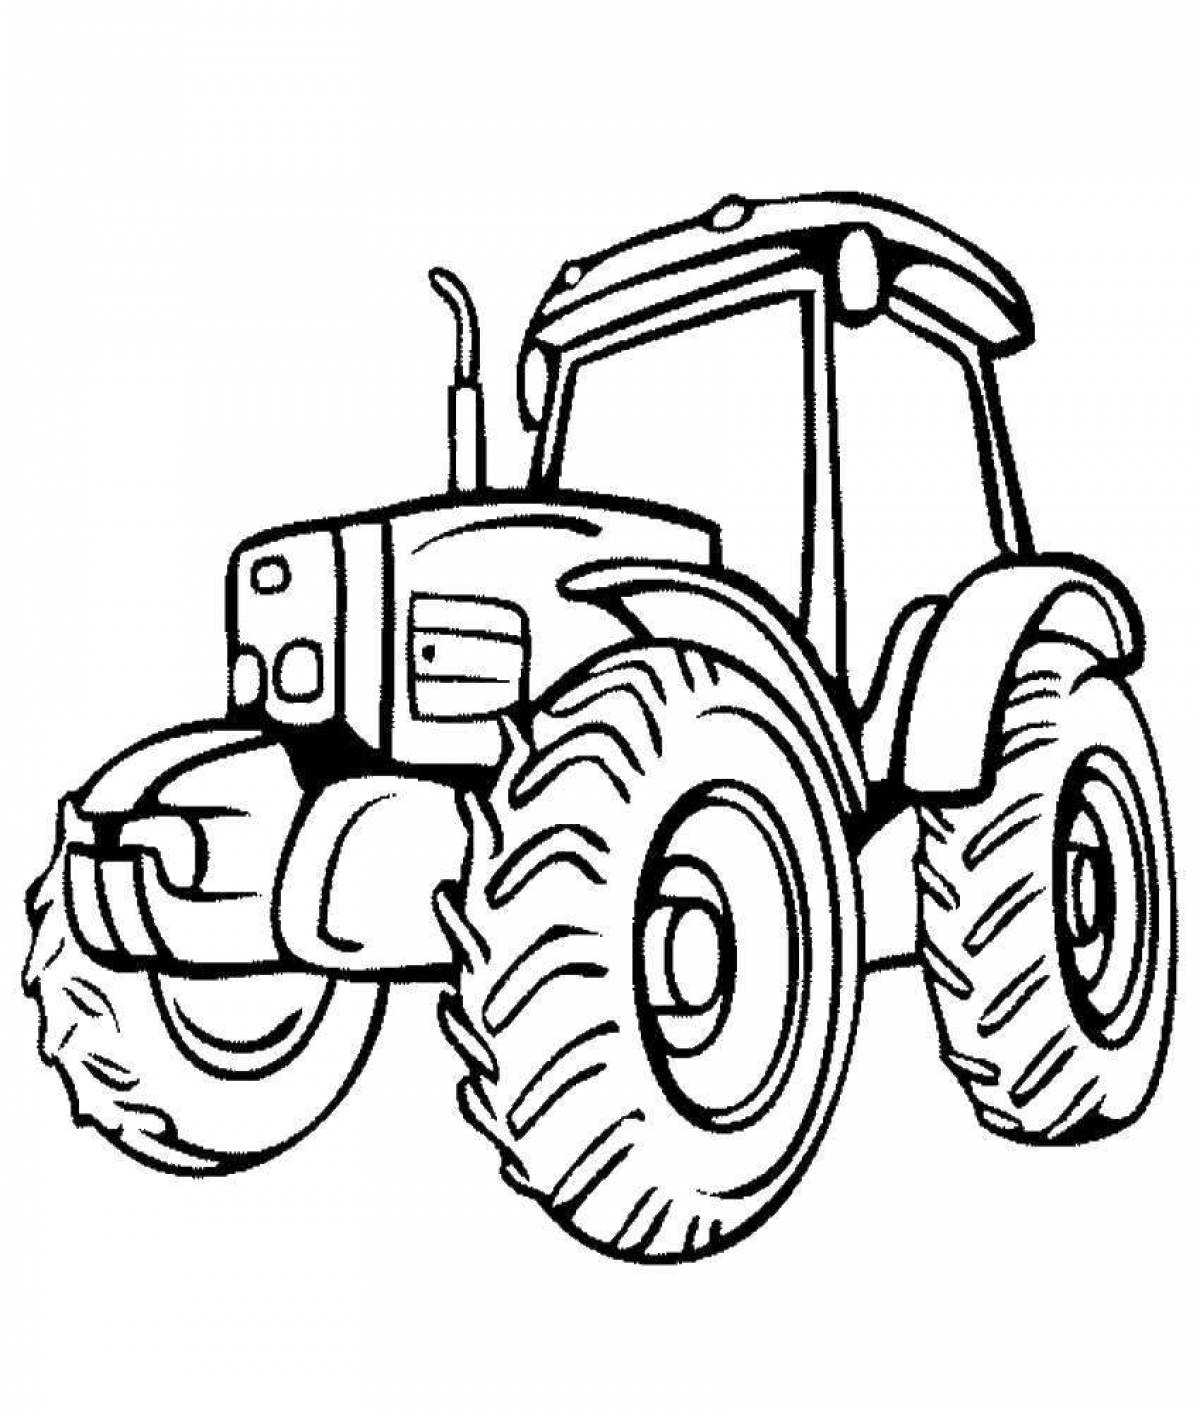 Exciting tractor car coloring page